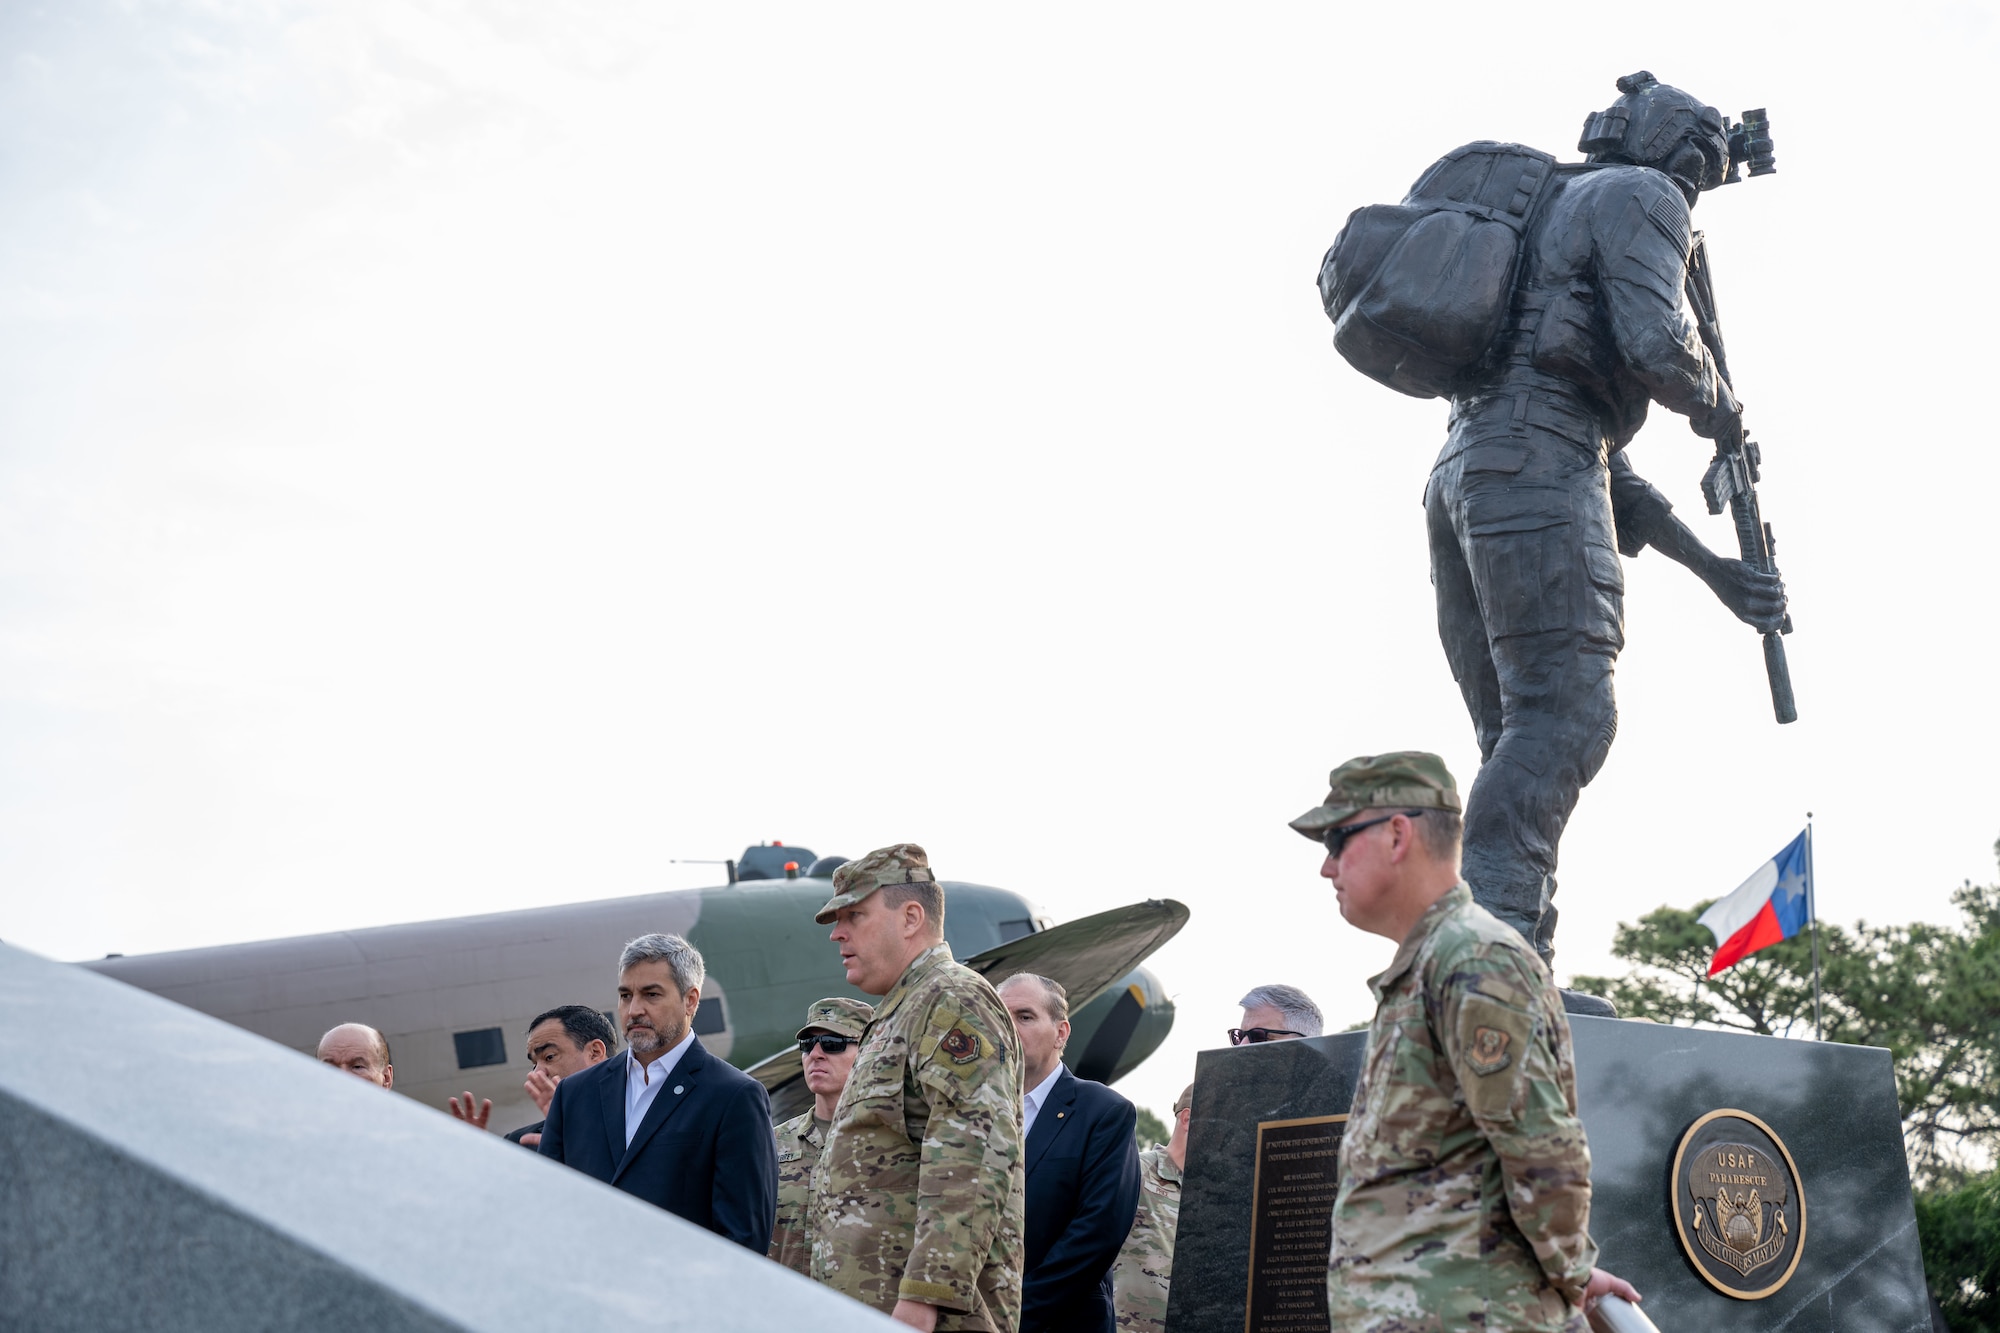 President Mario Abdo Benítez of the Republic of Paraguay tours the Hurlburt Field Memorial Air Park with Lt. Gen. Tony D. Bauernfeind, commander of Air Force Special Operations Command, and Chief Master Sgt. Cory M. Olson, AFSOC command chief, Hurlburt Field, Fla., March 31, 2023.